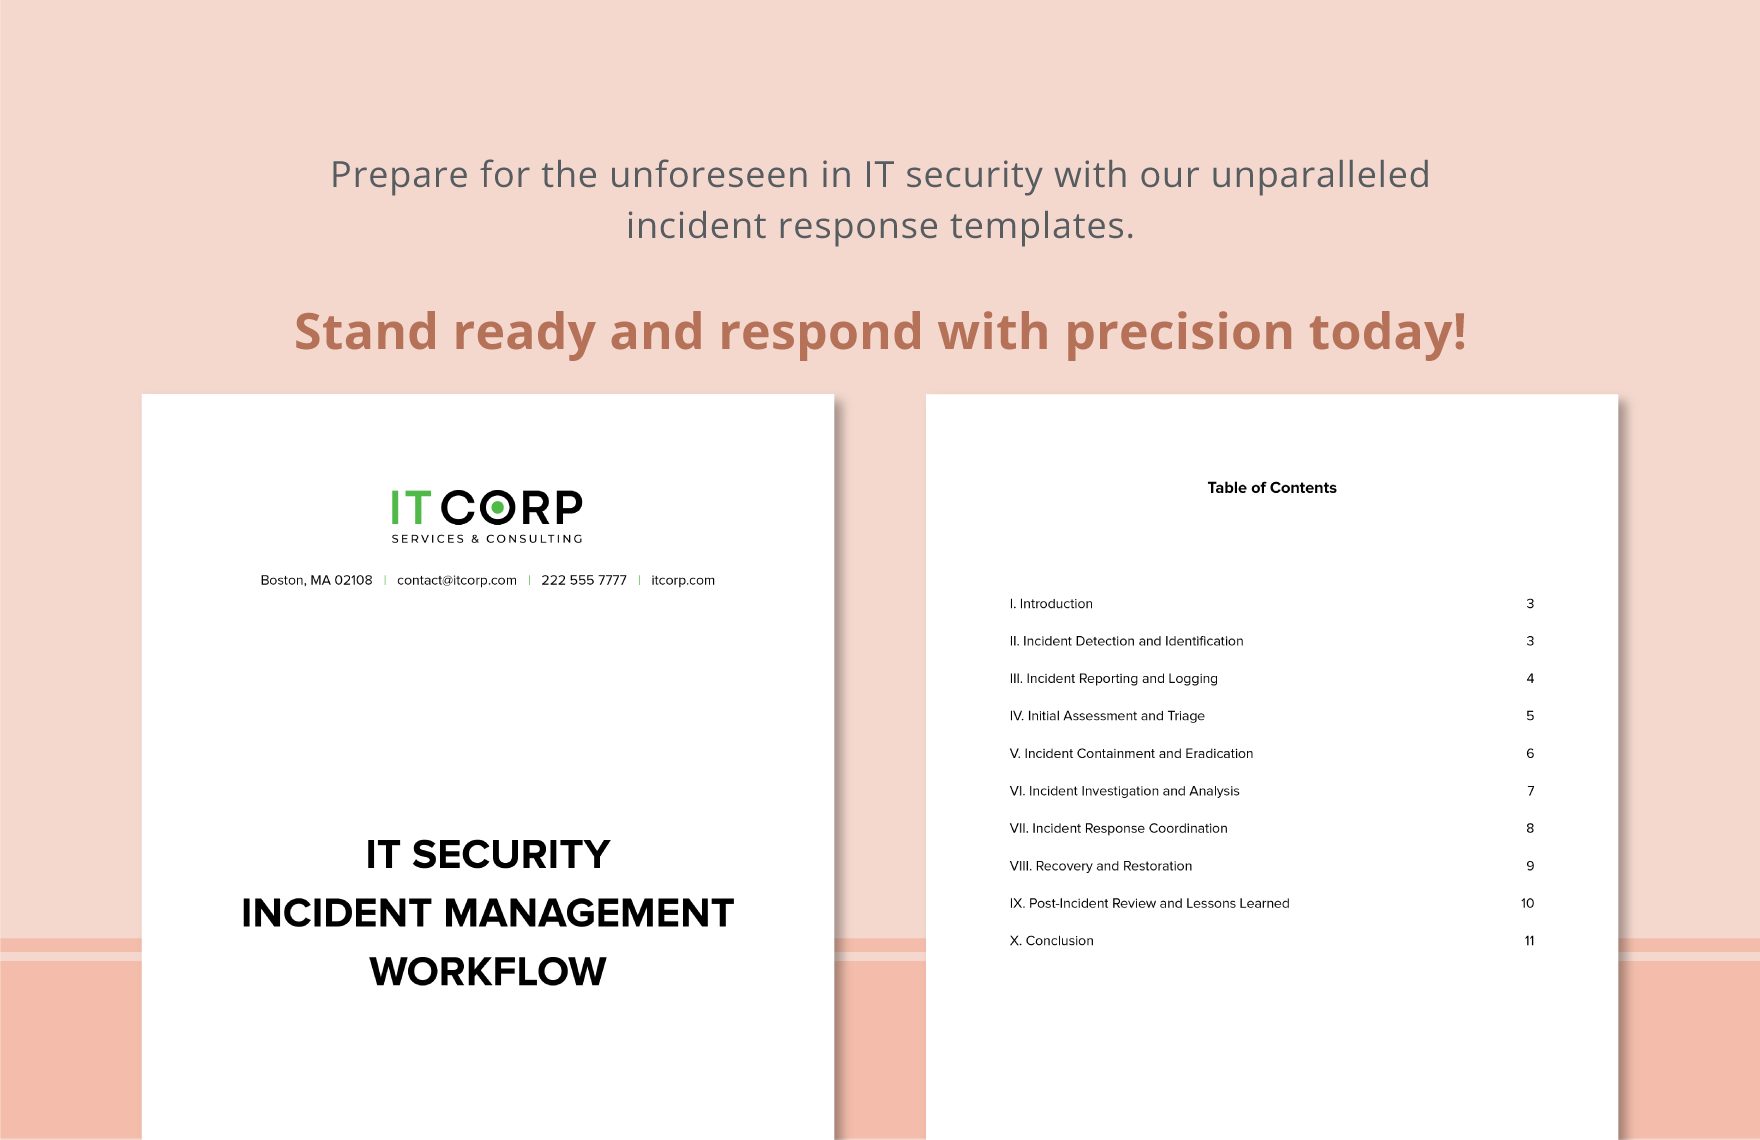 IT Security Incident Management Workflow Template